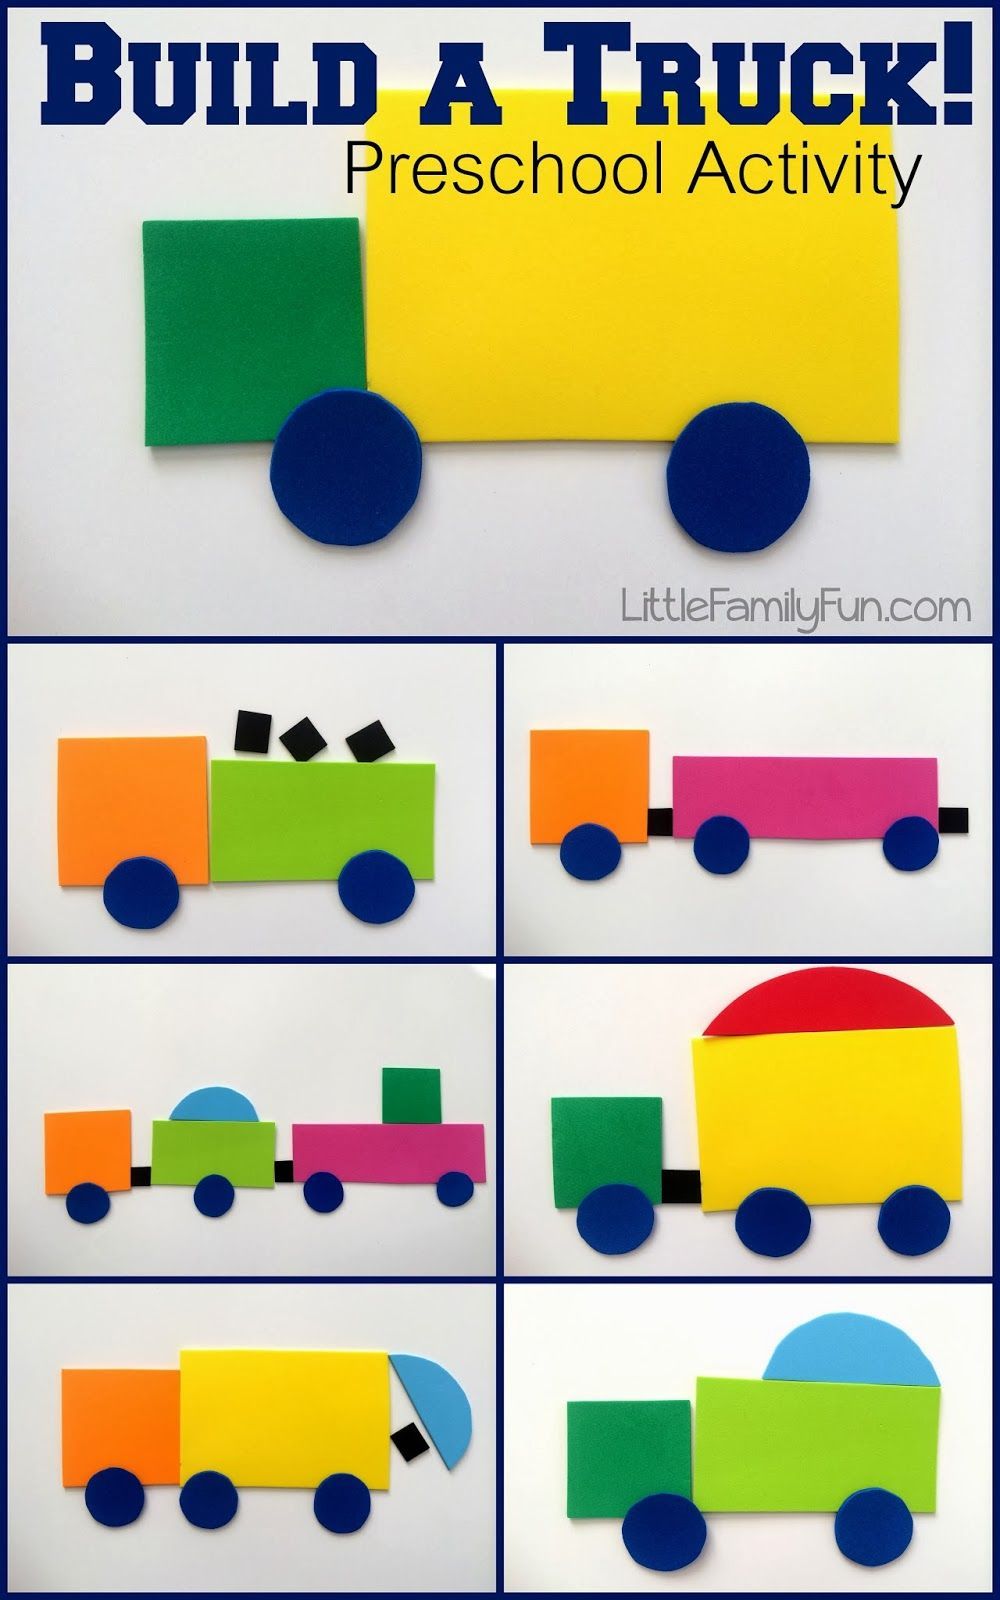 Build a Truck! Fun way to review SHAPES with preschoolers. Truck activity for kids!